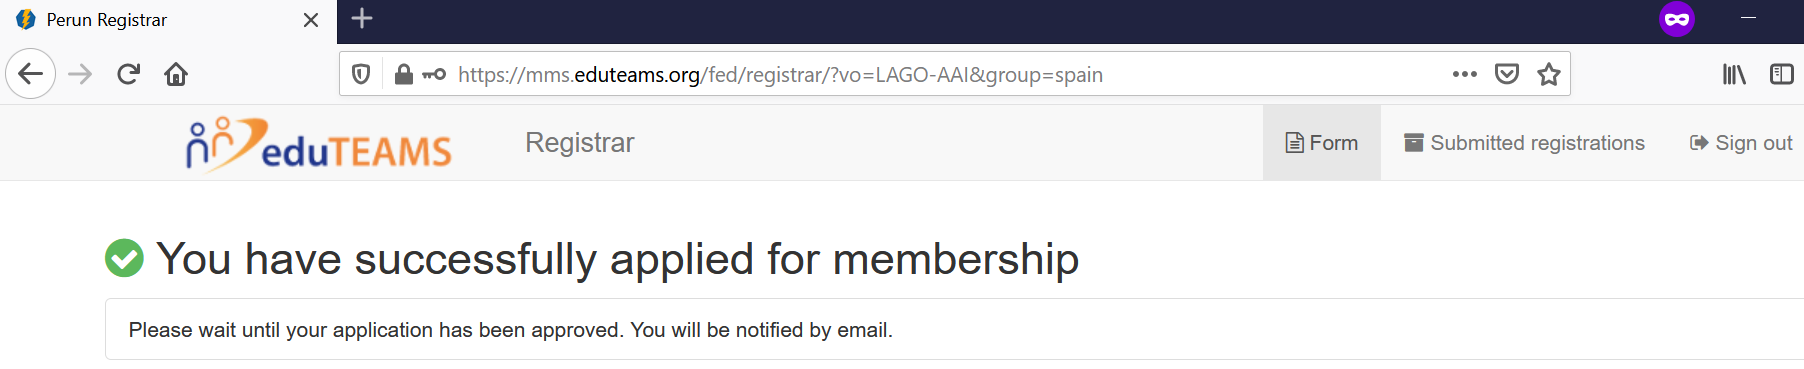 https://lagoproject.github.io/DMP/docs/howtos/how_to_join_LAGO_VO_img/RegistrationLAGO7.png